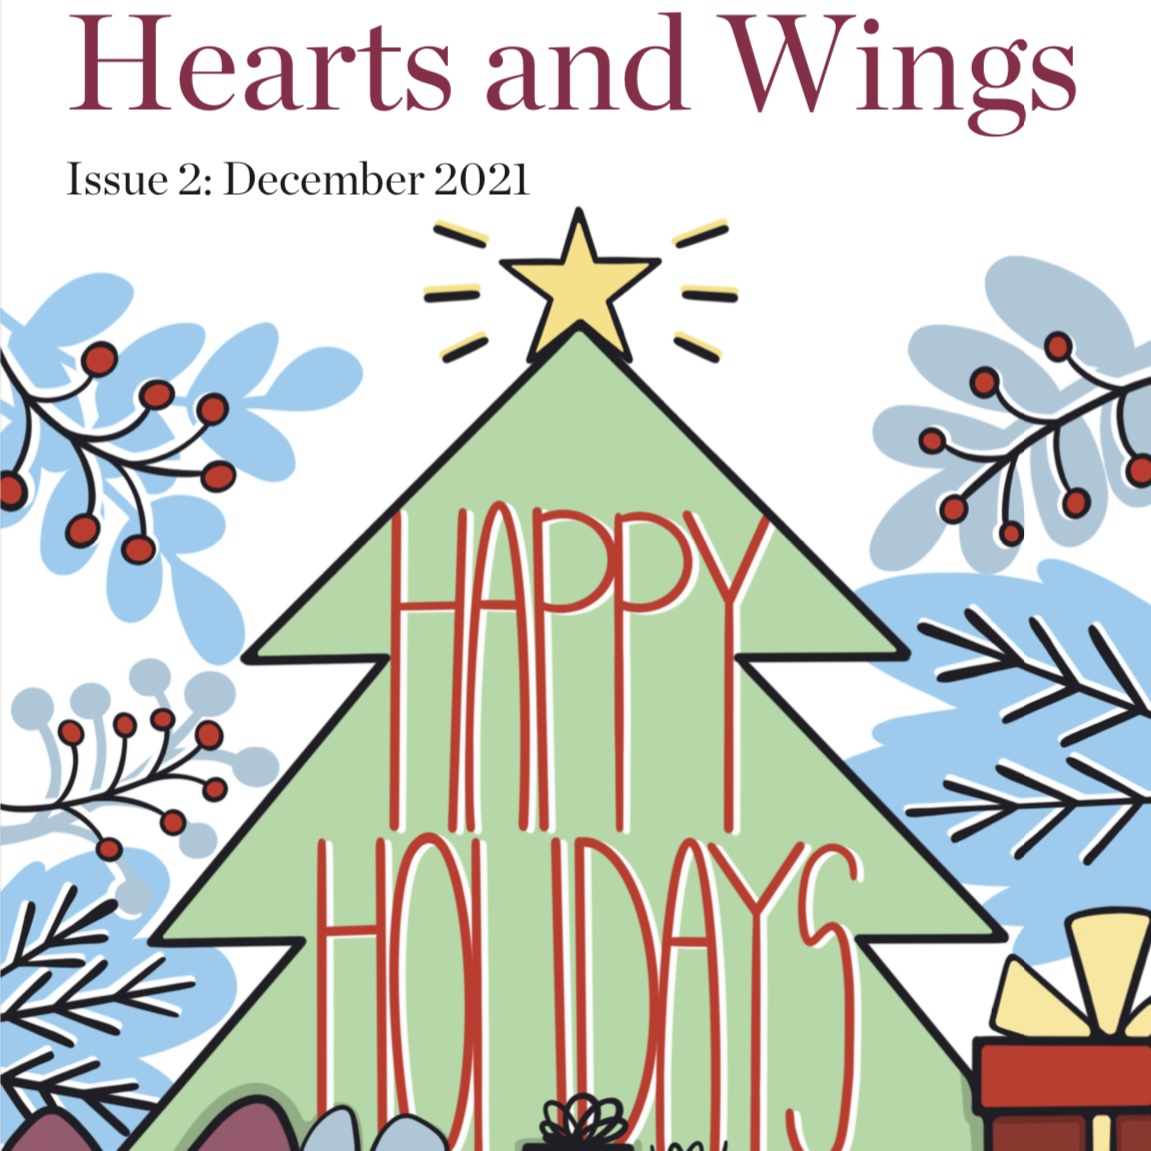 The Second Issue of "Hearts and Wings"